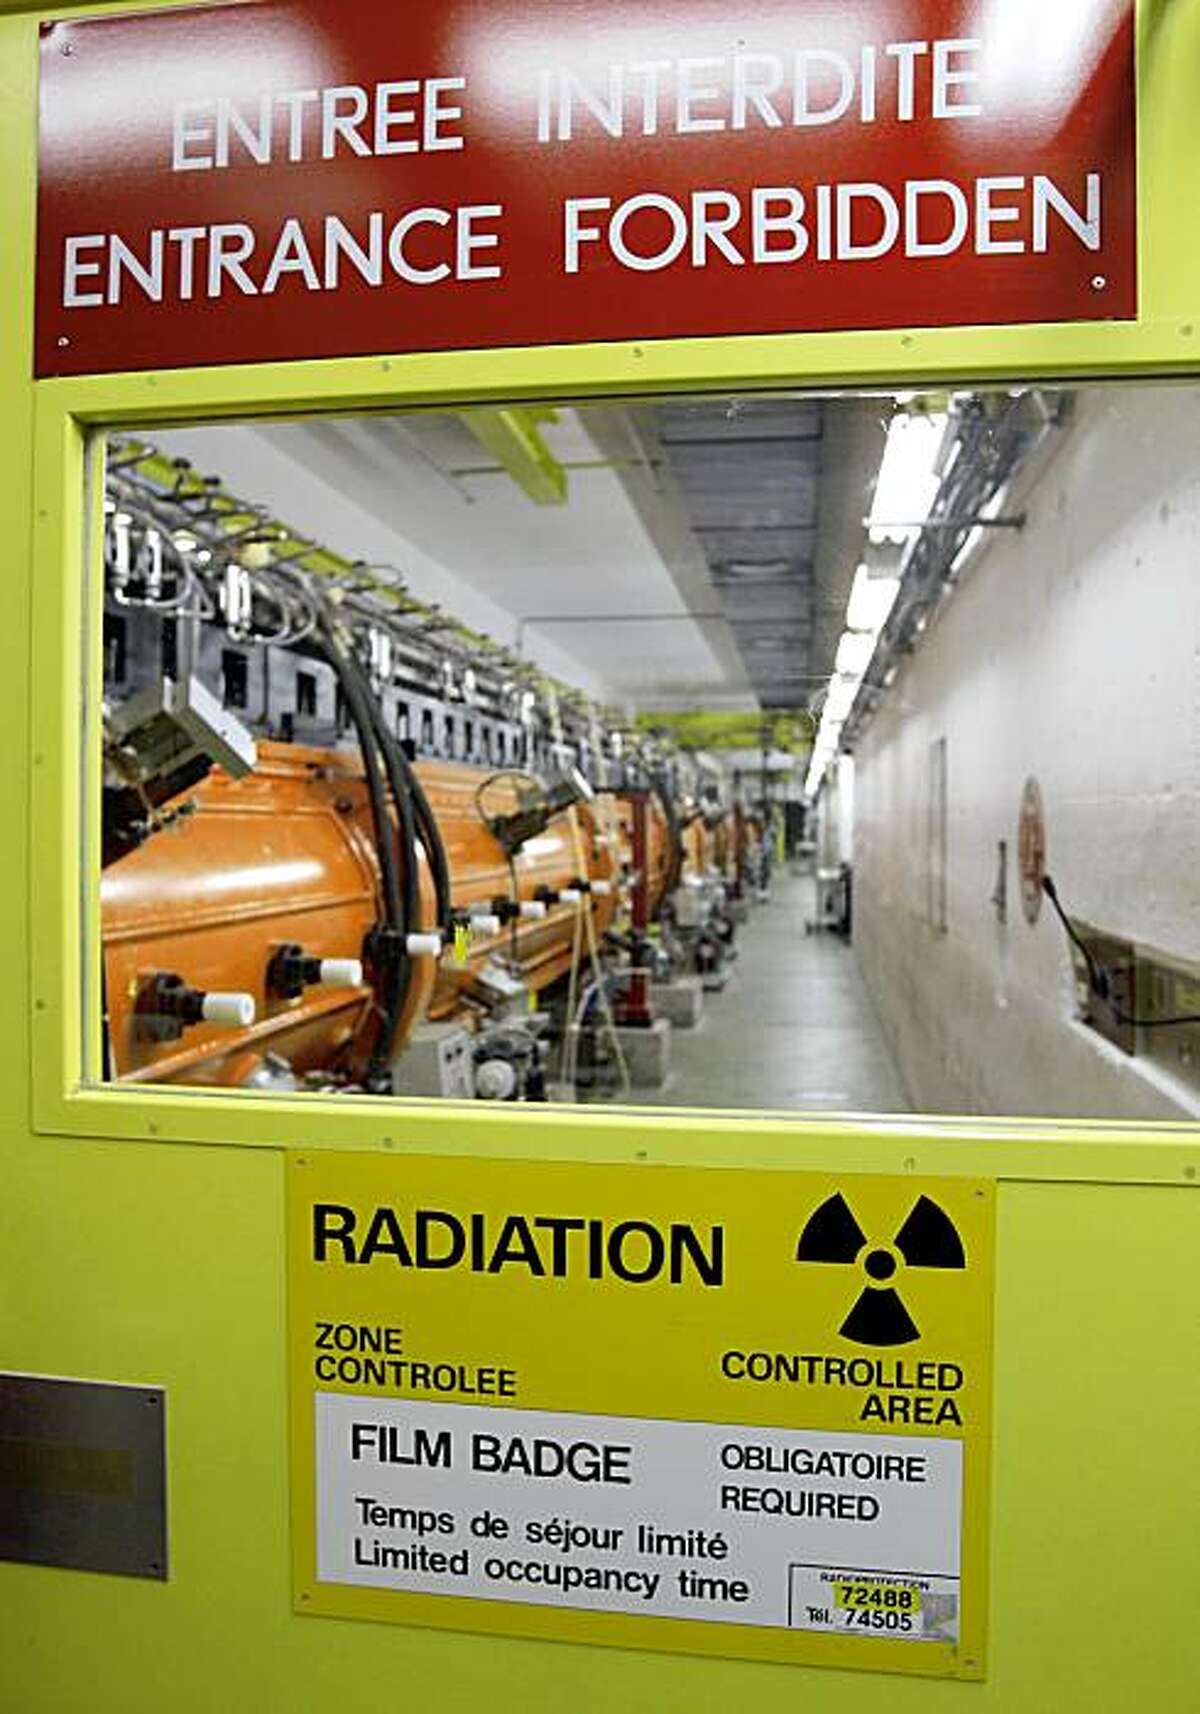 FILE - In this Oct. 16, 2008 file picture the inside view of a facility in the CERN laboratories is pictured near Geneva, Switzerland. French police have arrested a nuclear physicist on suspicion that he had links to terrorist organizations in Algeria, the European Organization for Nuclear Research said Friday Oct. 9, 2009. The man was one of more than 7,000 scientists working at the organization and has been assigned to analysis projects under contract with an outside institute, said the organization, known as CERN. (AP Photo/Keystone, Martial Trezzini,File). (AP Photo/Keystone/Keystone,Martial Trezzini,File)